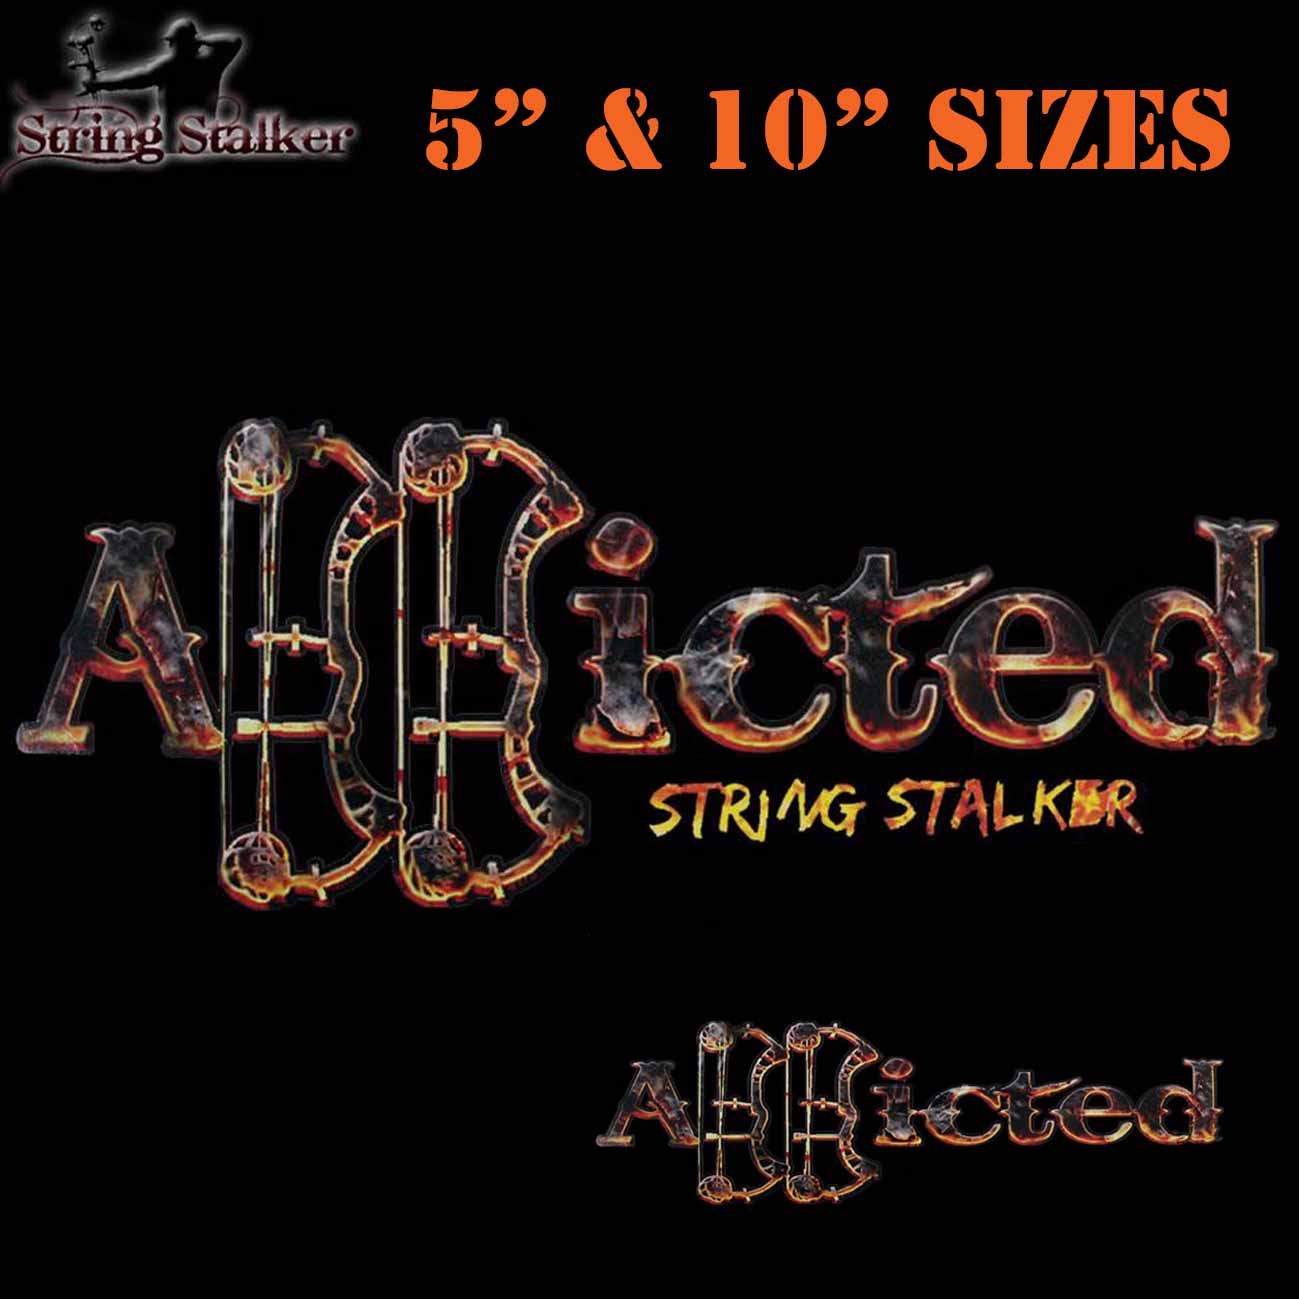 String Stalker Bow Hunting Scorched Addicted Decal